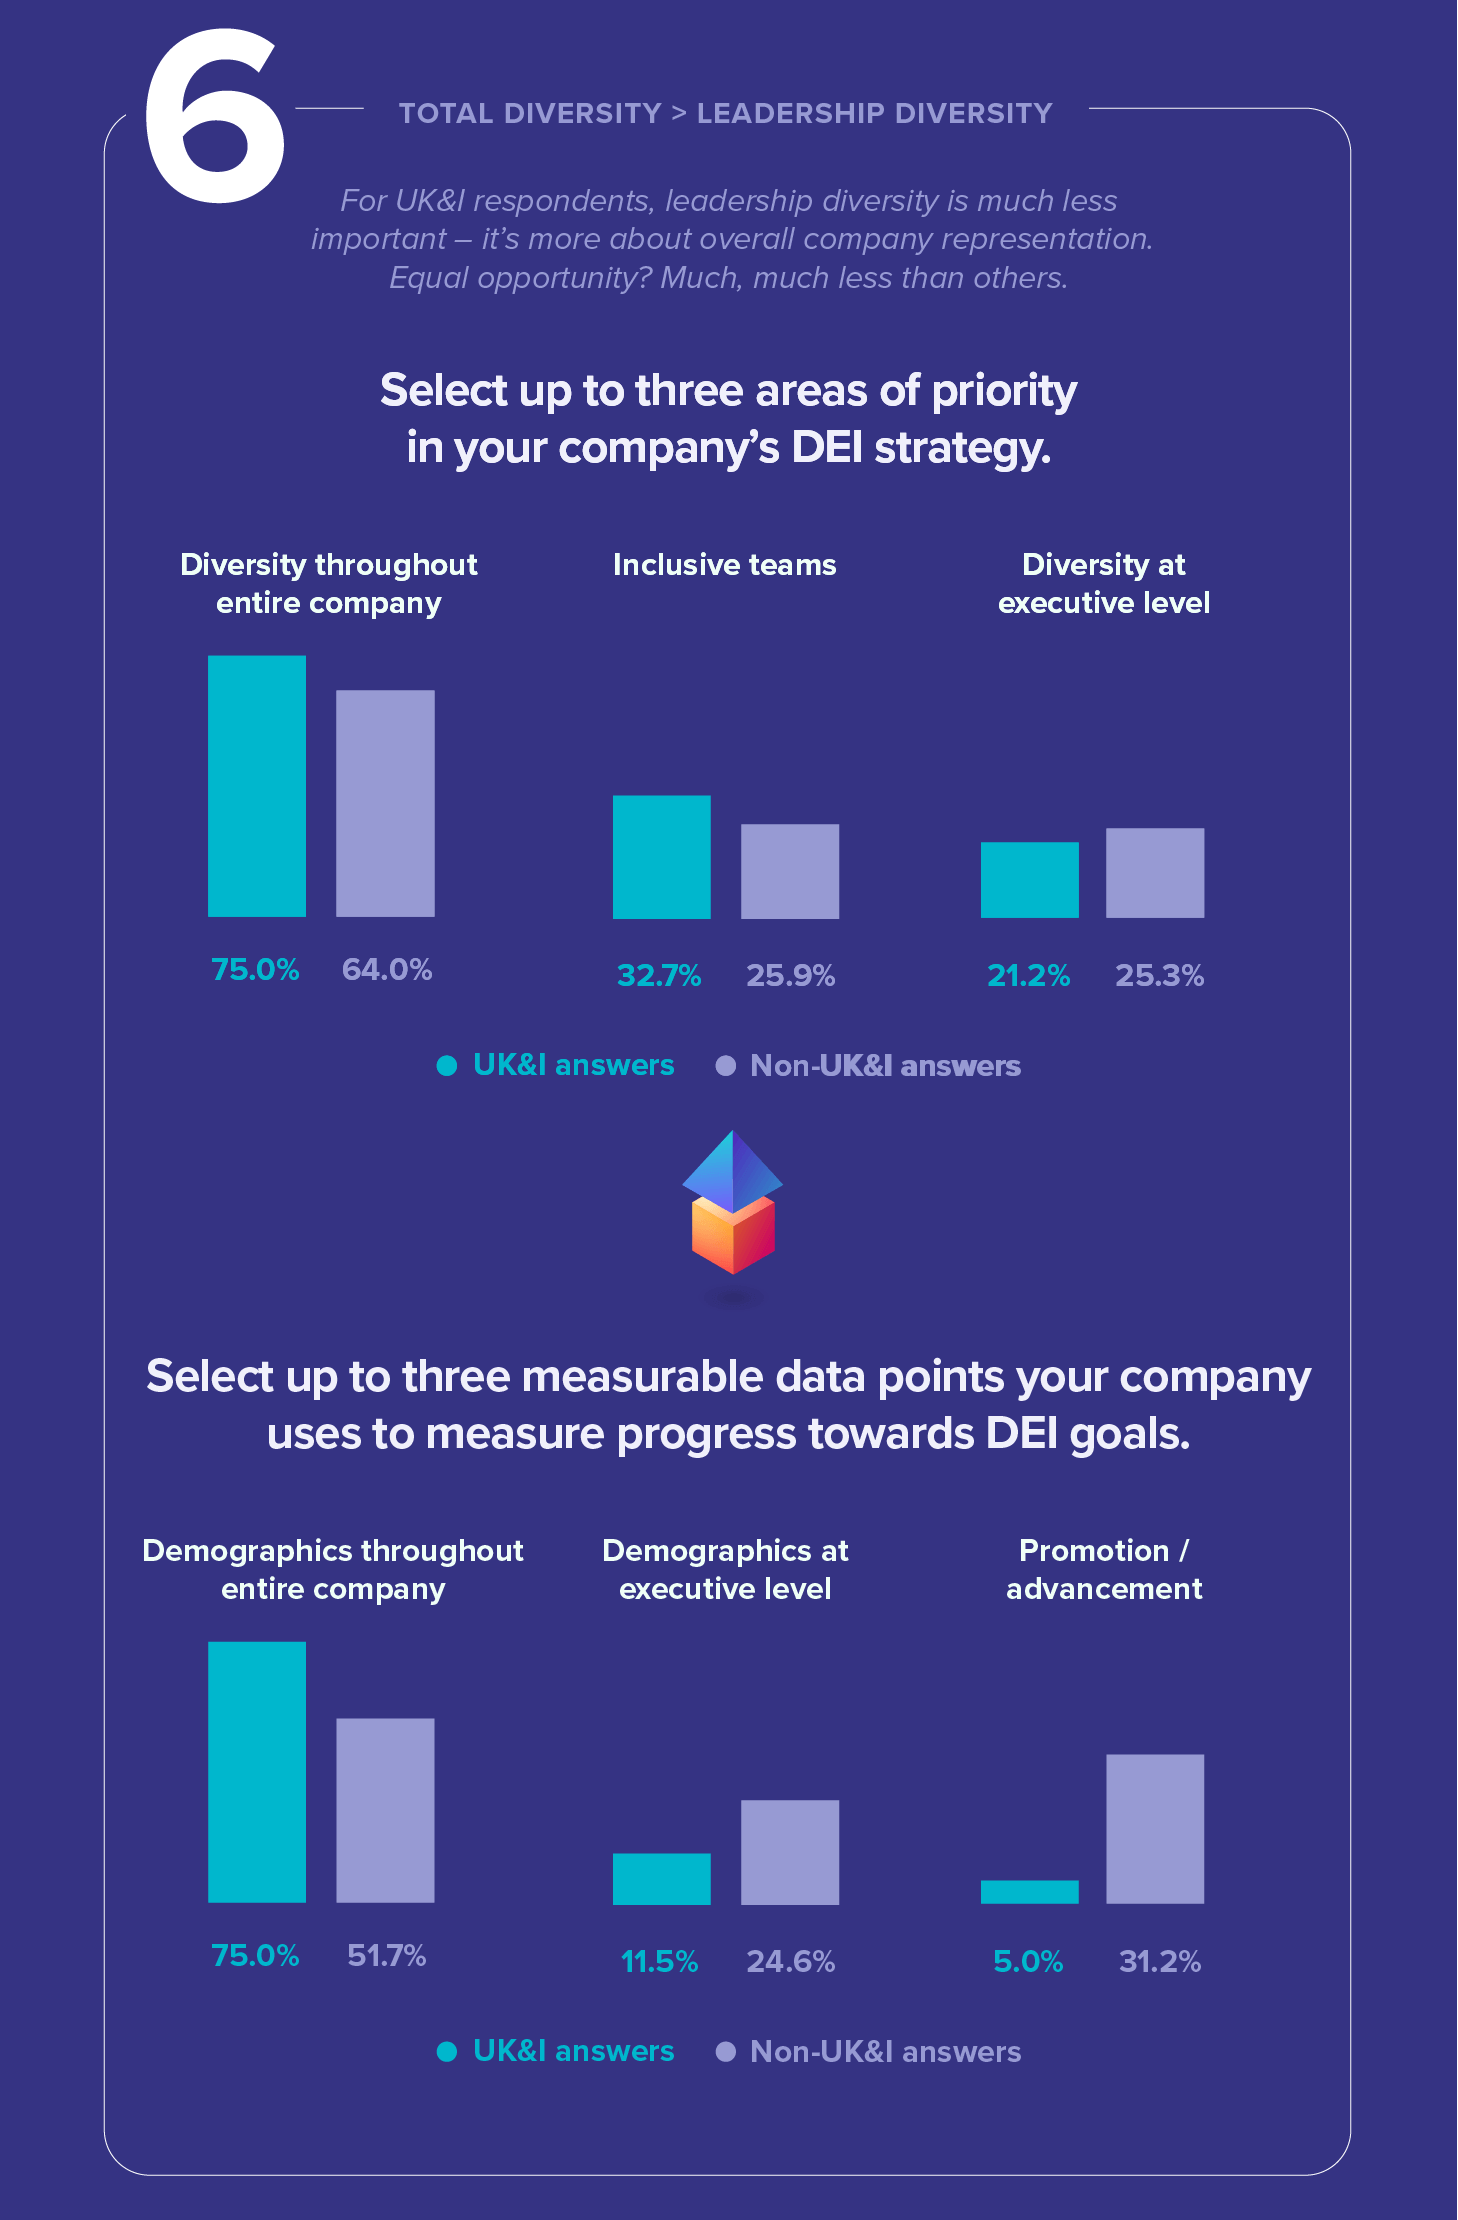 Select up to three areas of priority in your company's DEI strategy.